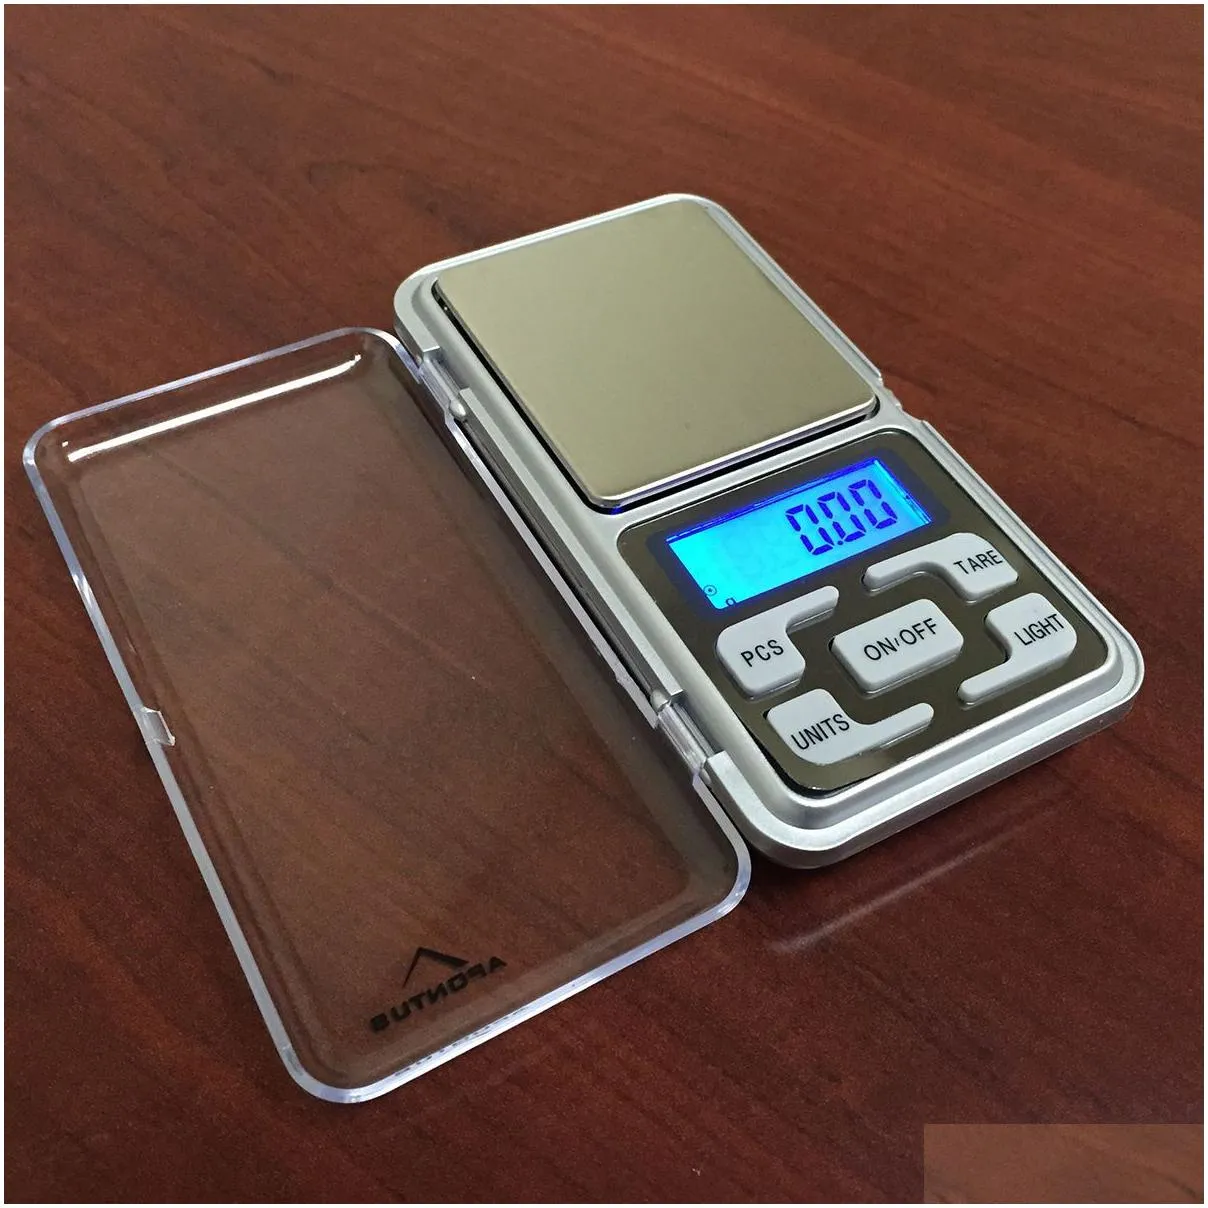 wholesale Digital Scales Digital Jewelry Scale Gold Silver Coin Grain Gram Pocket Size Herb Mini Electronic backlight 100g 200g 500g fast